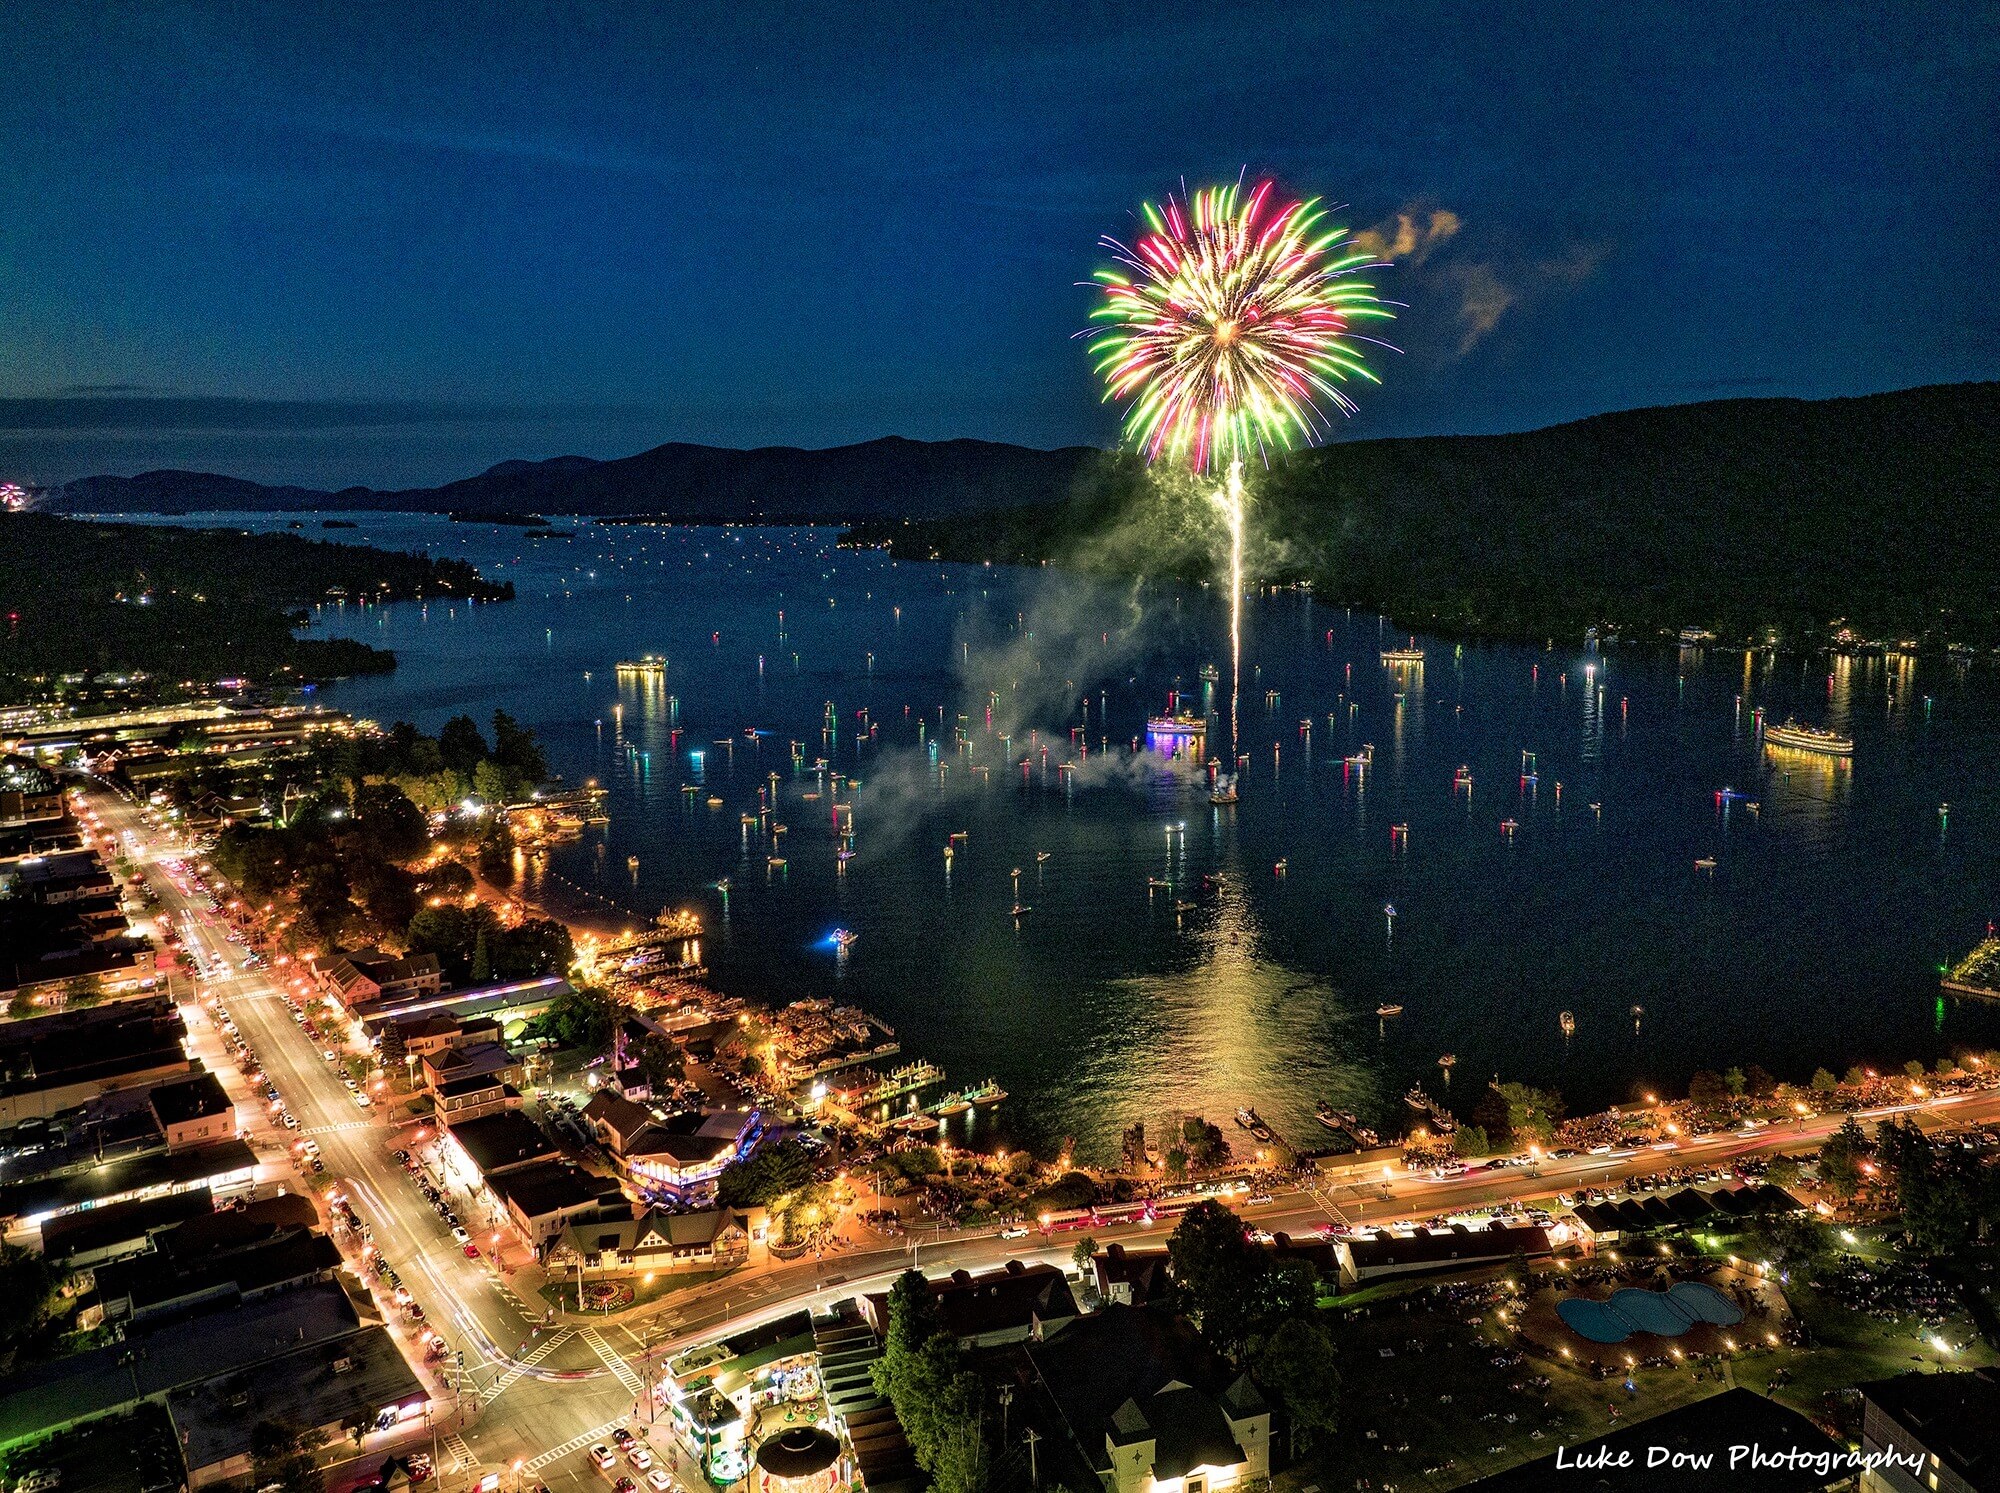 Celebrate Independence Day All Weekend with Fireworks Around the Lake